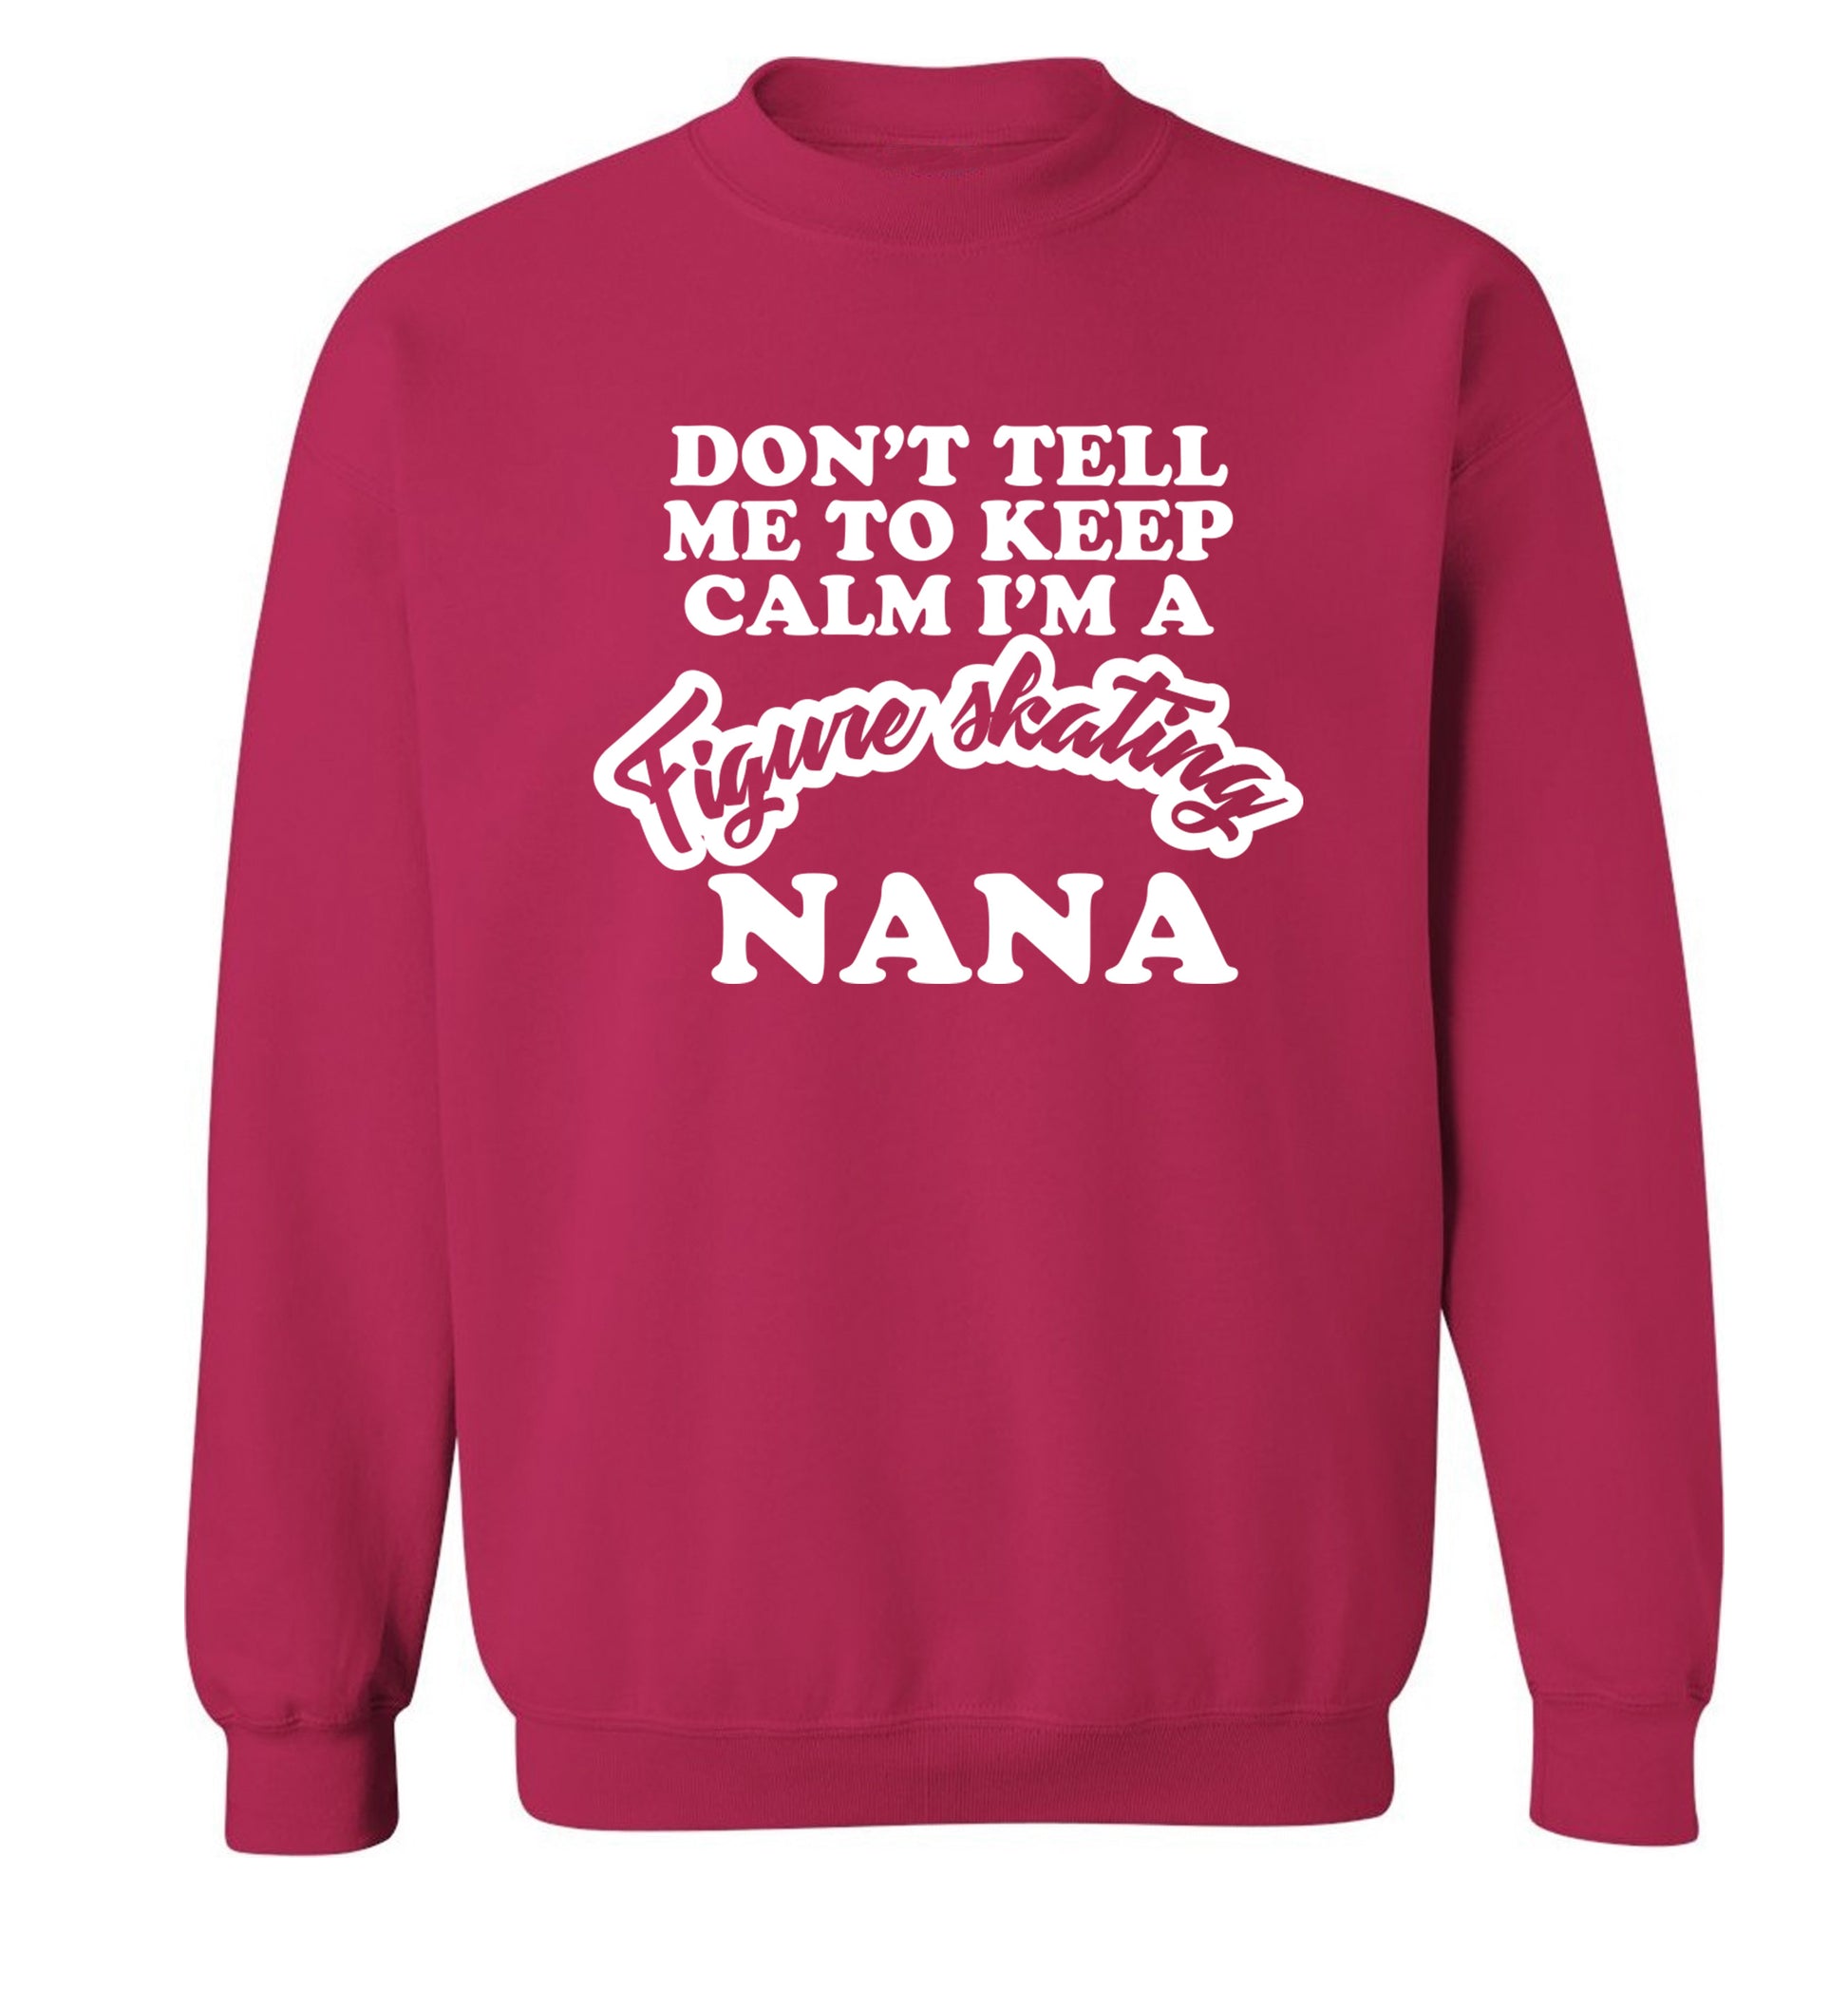 Don't tell me to keep calm I'm a figure skating nana Adult's unisexpink Sweater 2XL